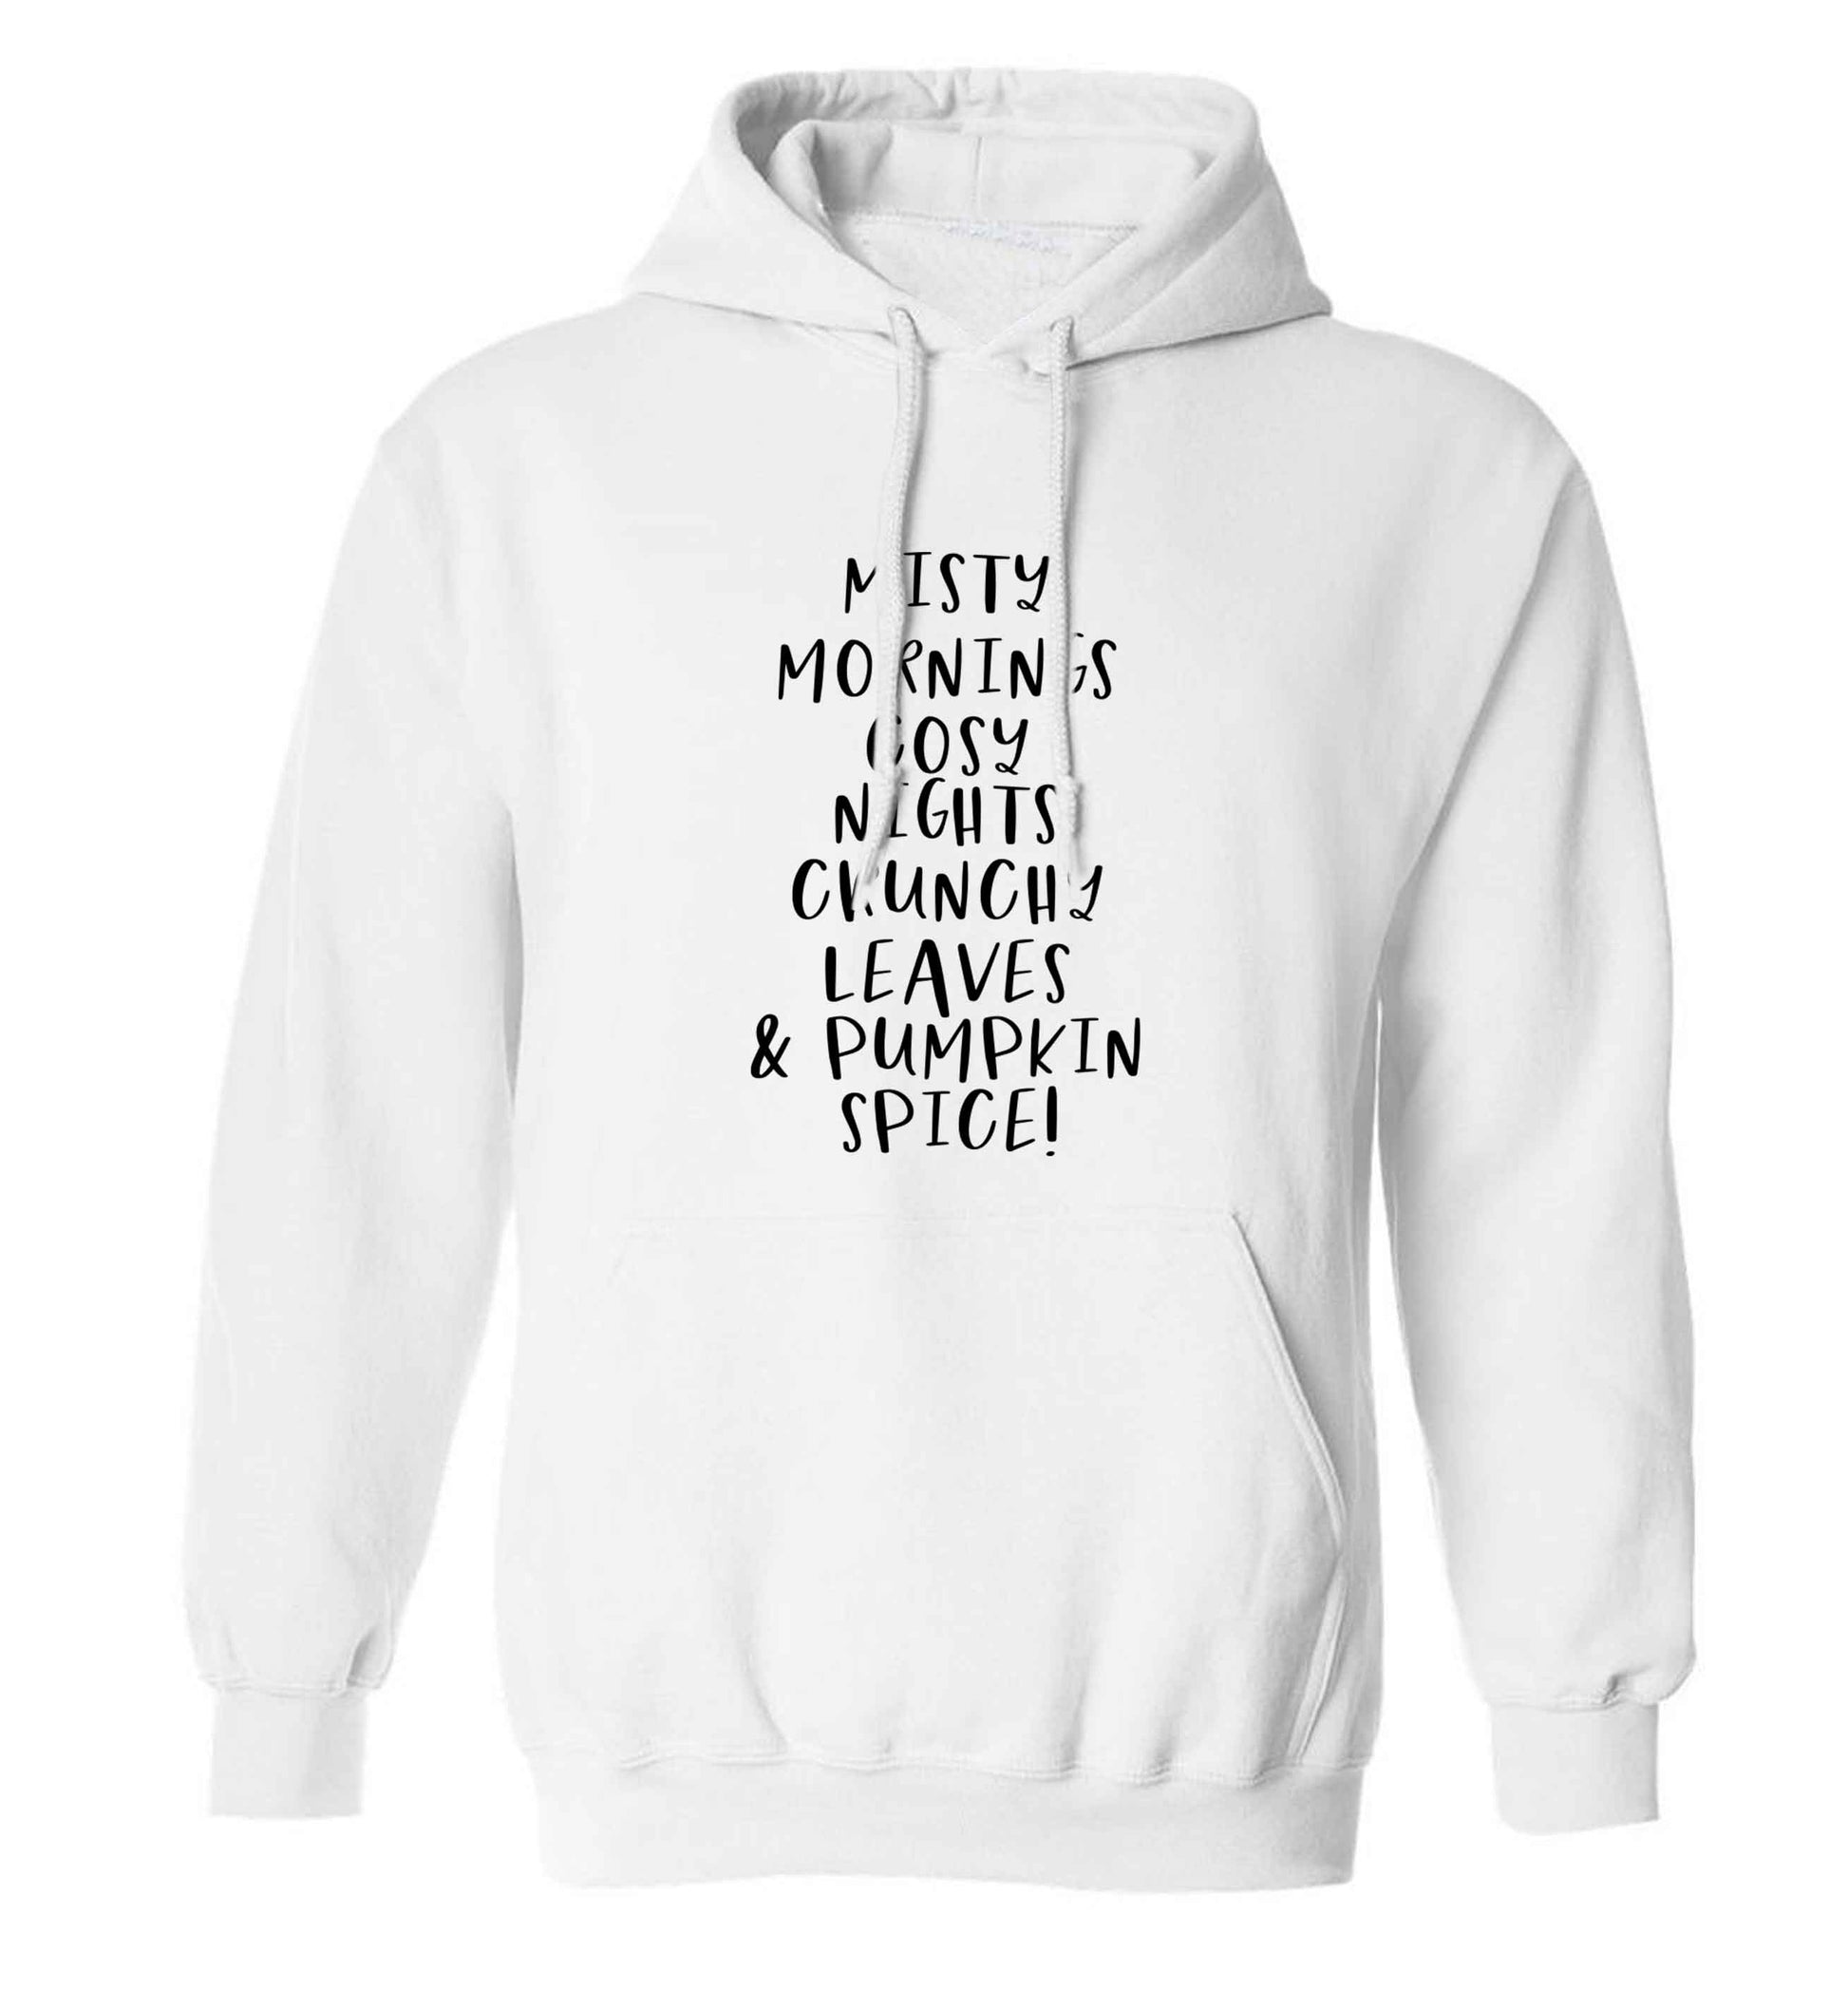 Misty Mornings adults unisex white hoodie 2XL